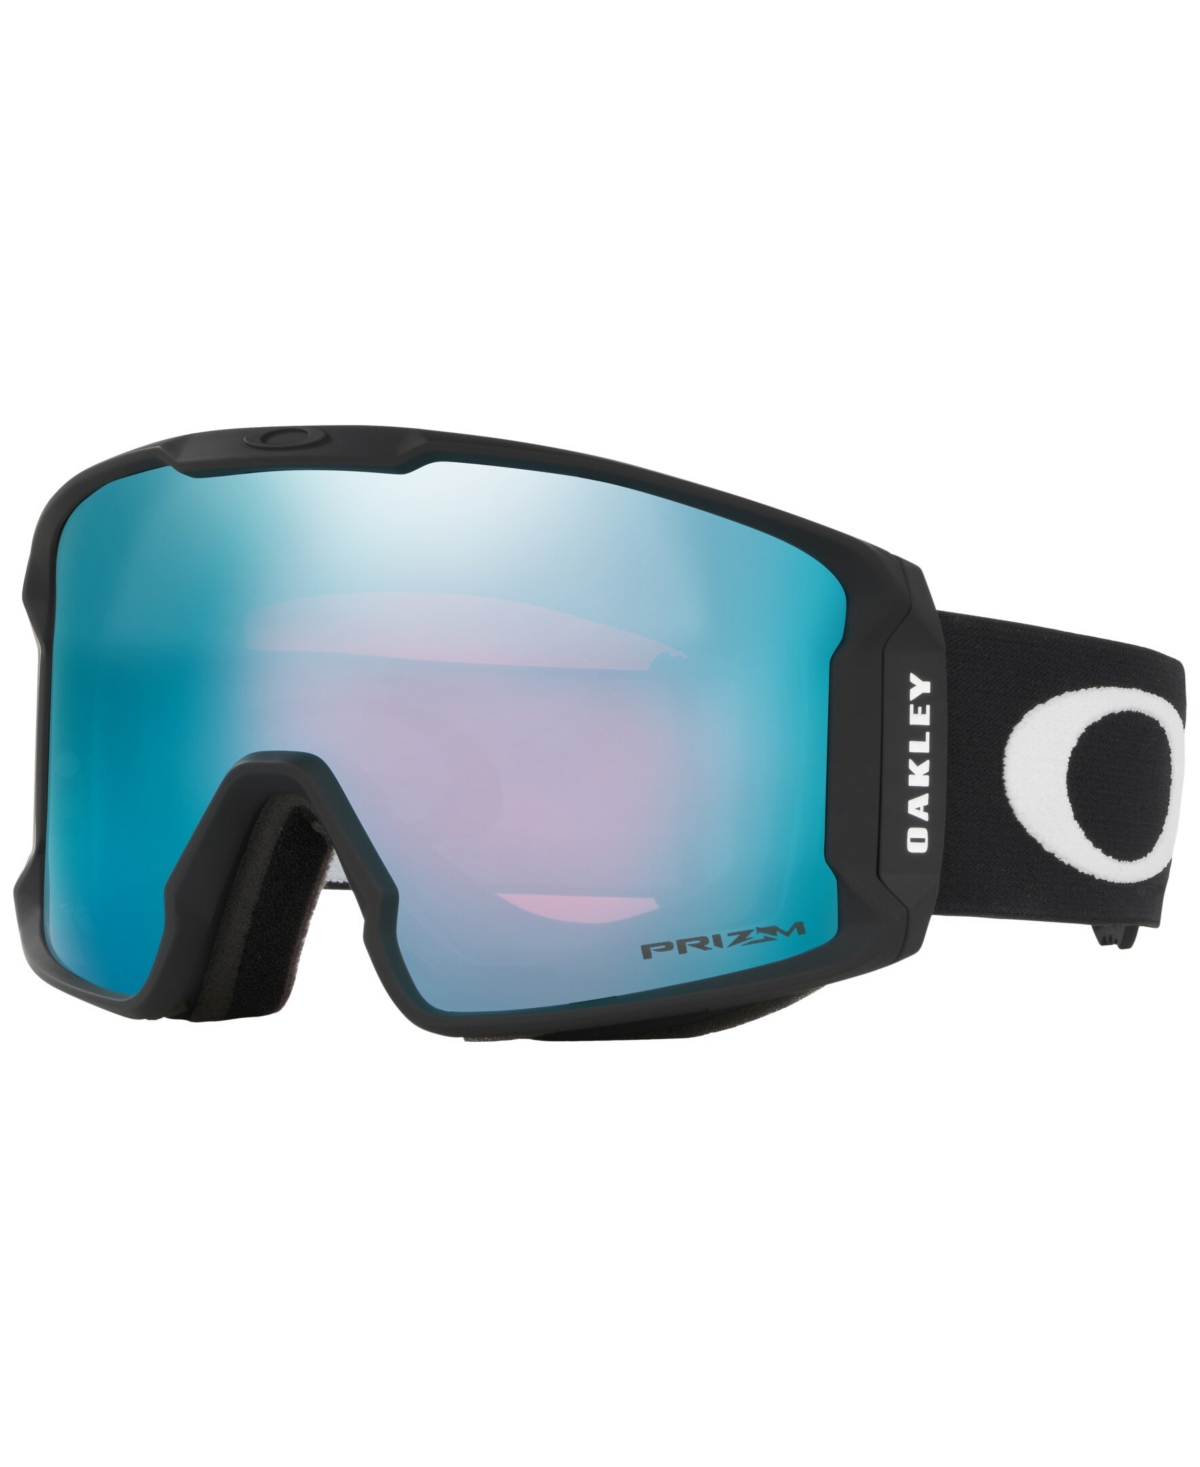 OAKLEY UNISEX LINE MINER L SNOW GOGGLES, OO7070-04